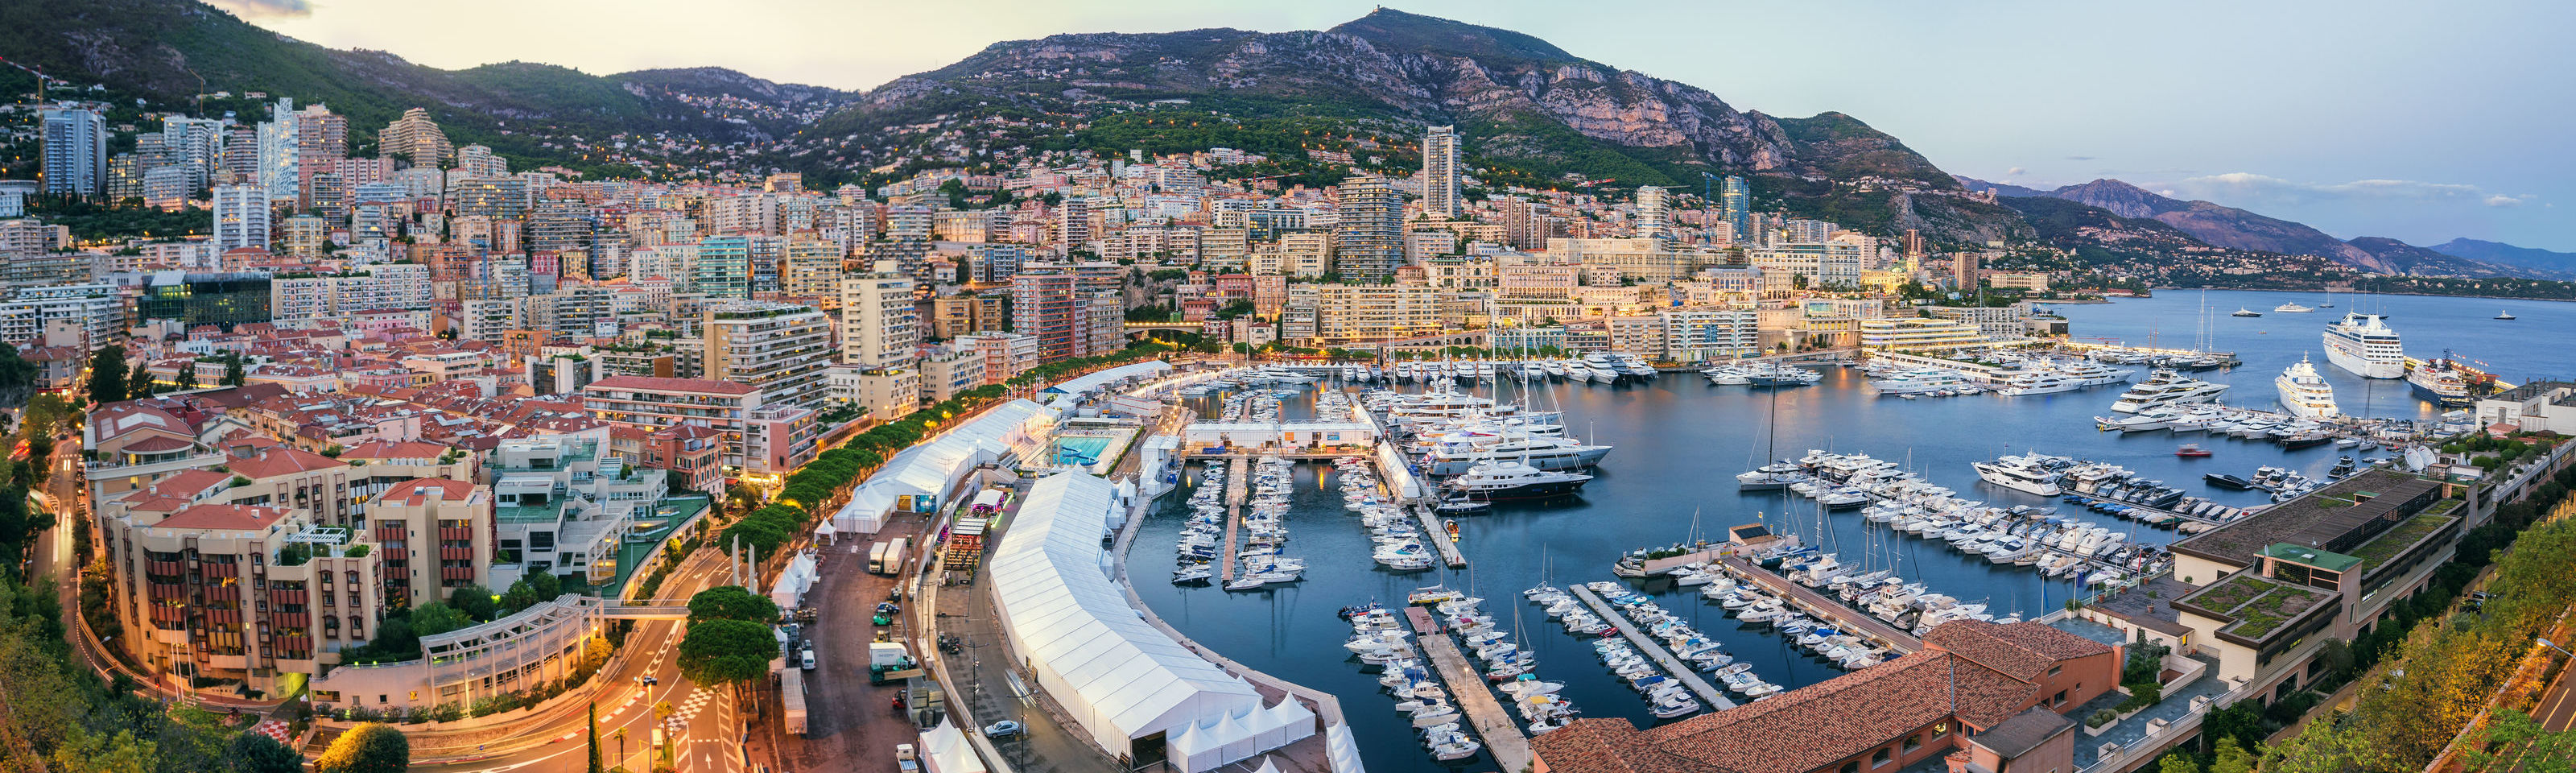 MYS 2022: Superyachts We Can't WAIT To See!